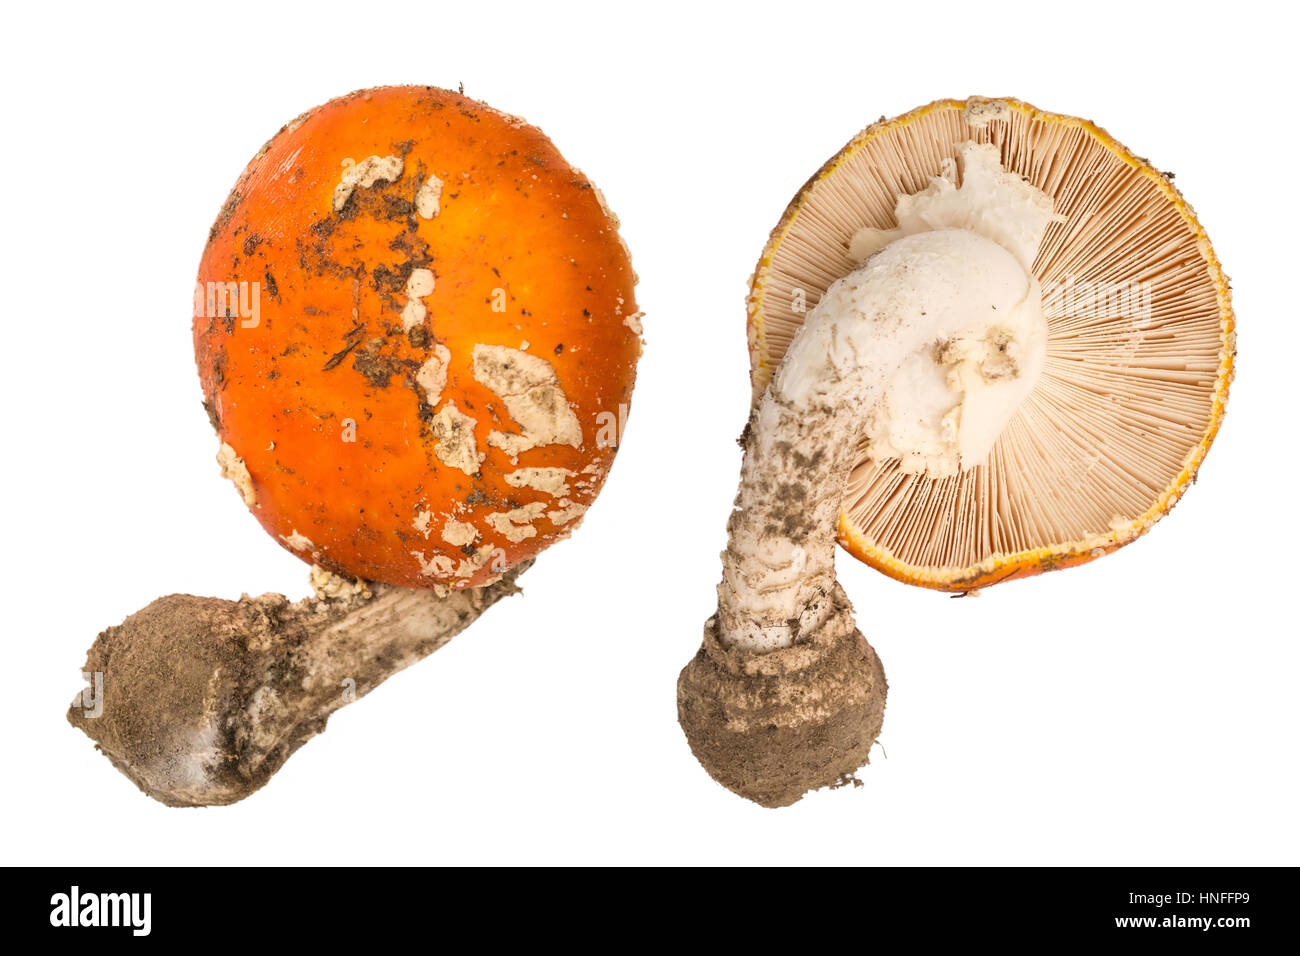 Amanita muscaria mushroom isolated. Amanita view from above and from below Stock Photo